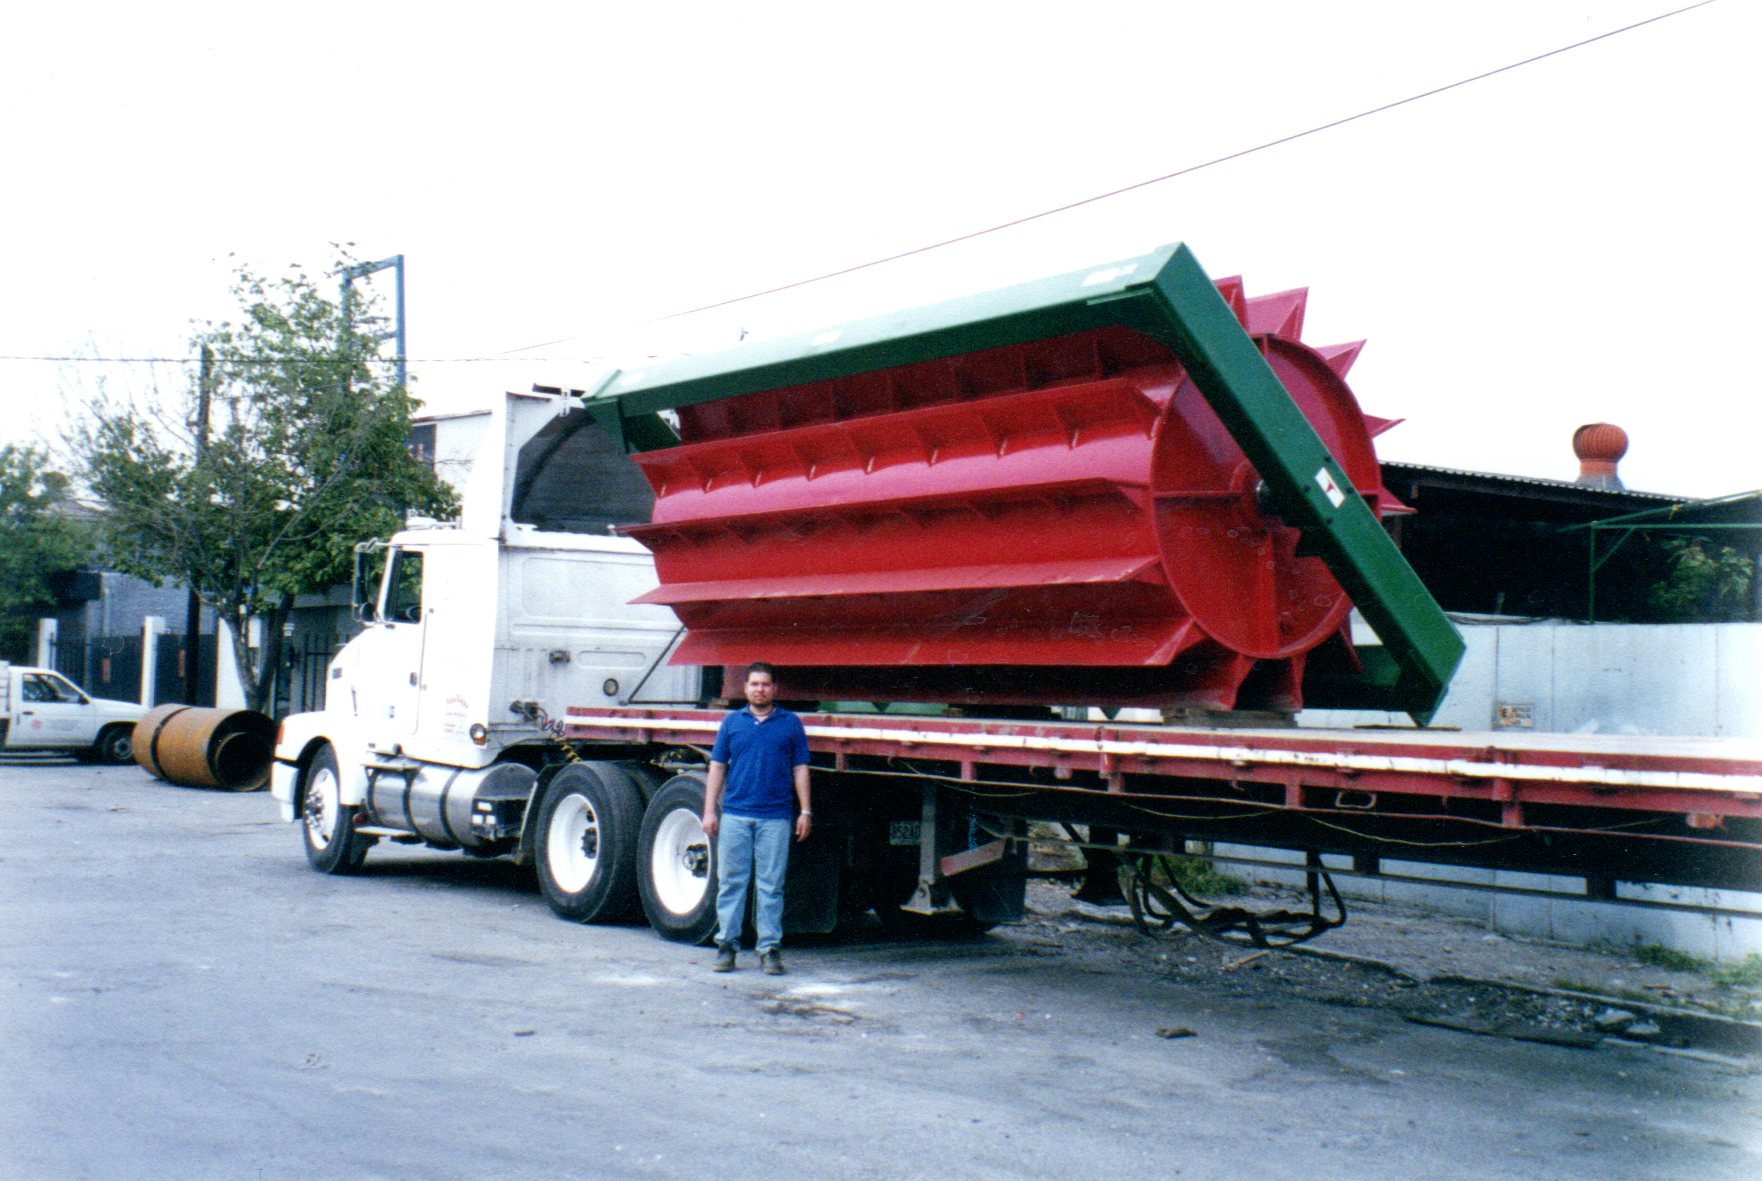 Chopper Blade loaded for delivery